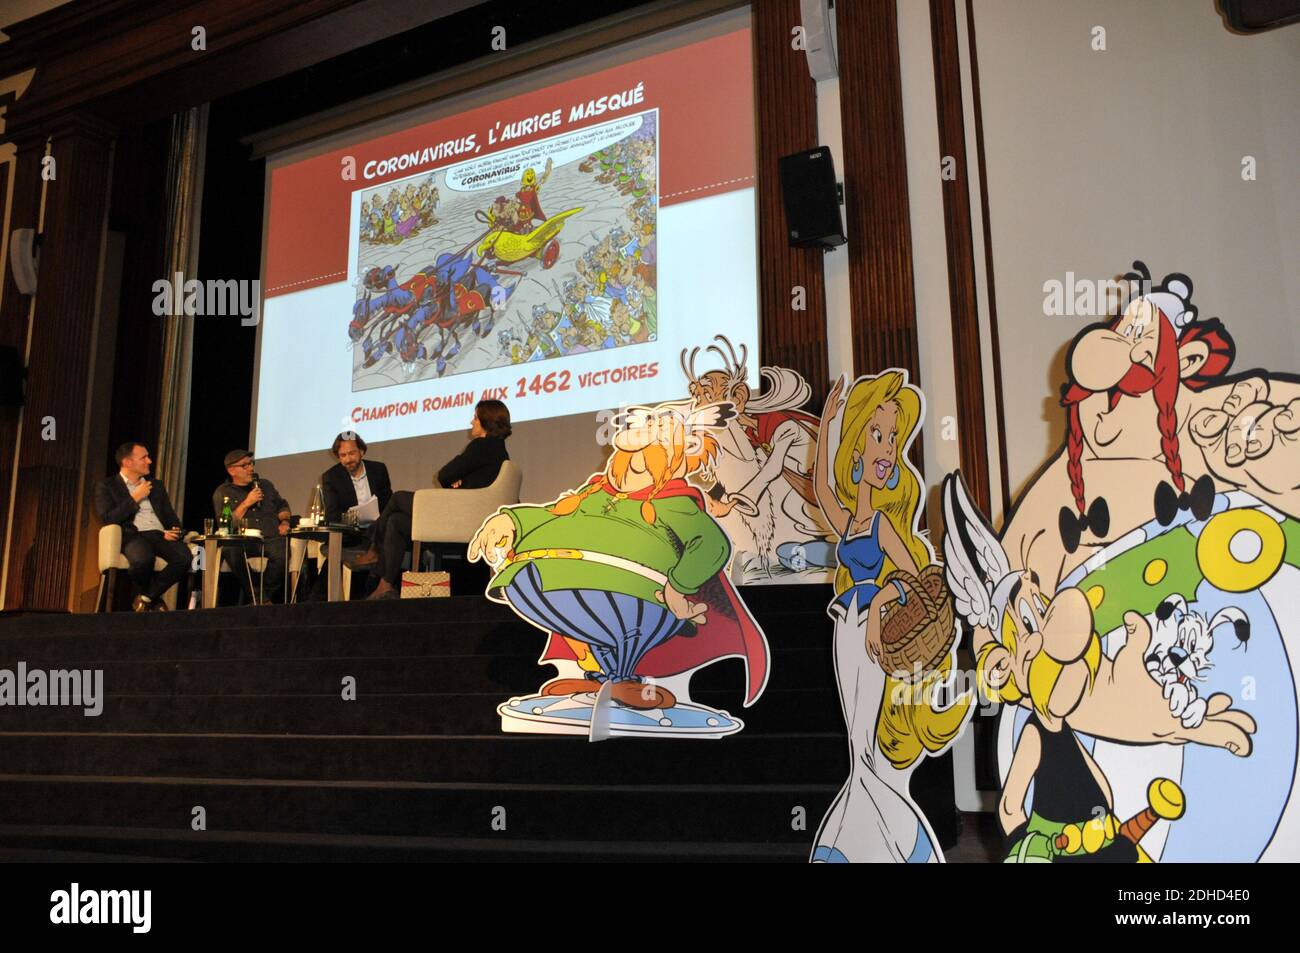 bicycle Cloudy Delicious Didier Conrad, Jean-Yves Ferri, daughter of the late scenarist and  co-creator of Asterix and Obelix cartoons Rene Goscinny, Anne Goscinny  attending the press conference for the announcement of the release of the